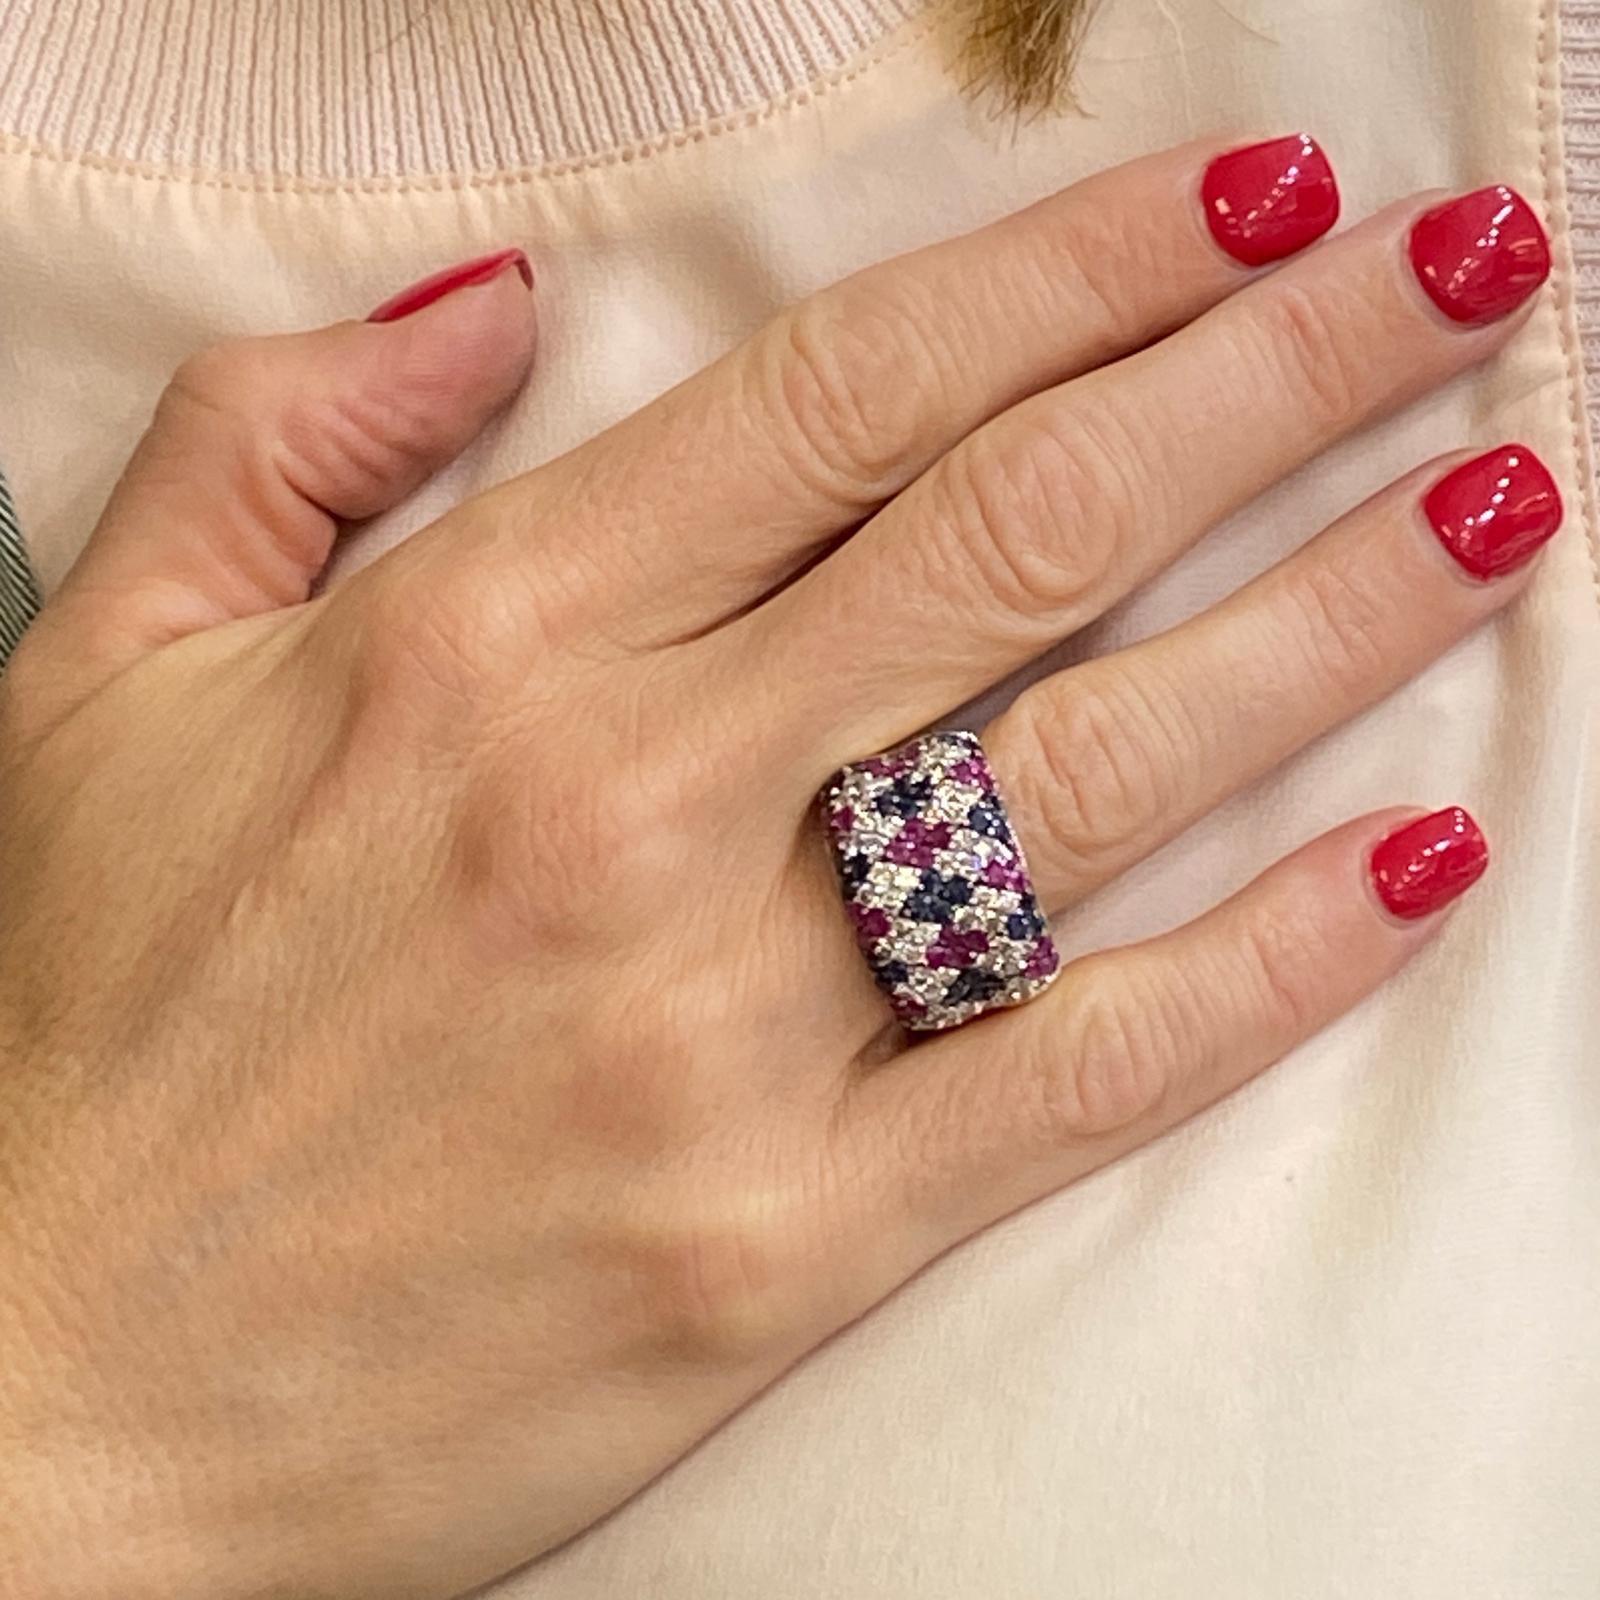 Colorful wide band ring circa 1970's. The band is set with ruby, sapphire, and diamonds in a diamond shape configuration. The ring features 46 round brilliant cut diamonds that equal approximately 1.38 carat total weight. Fashioned in 14 karat